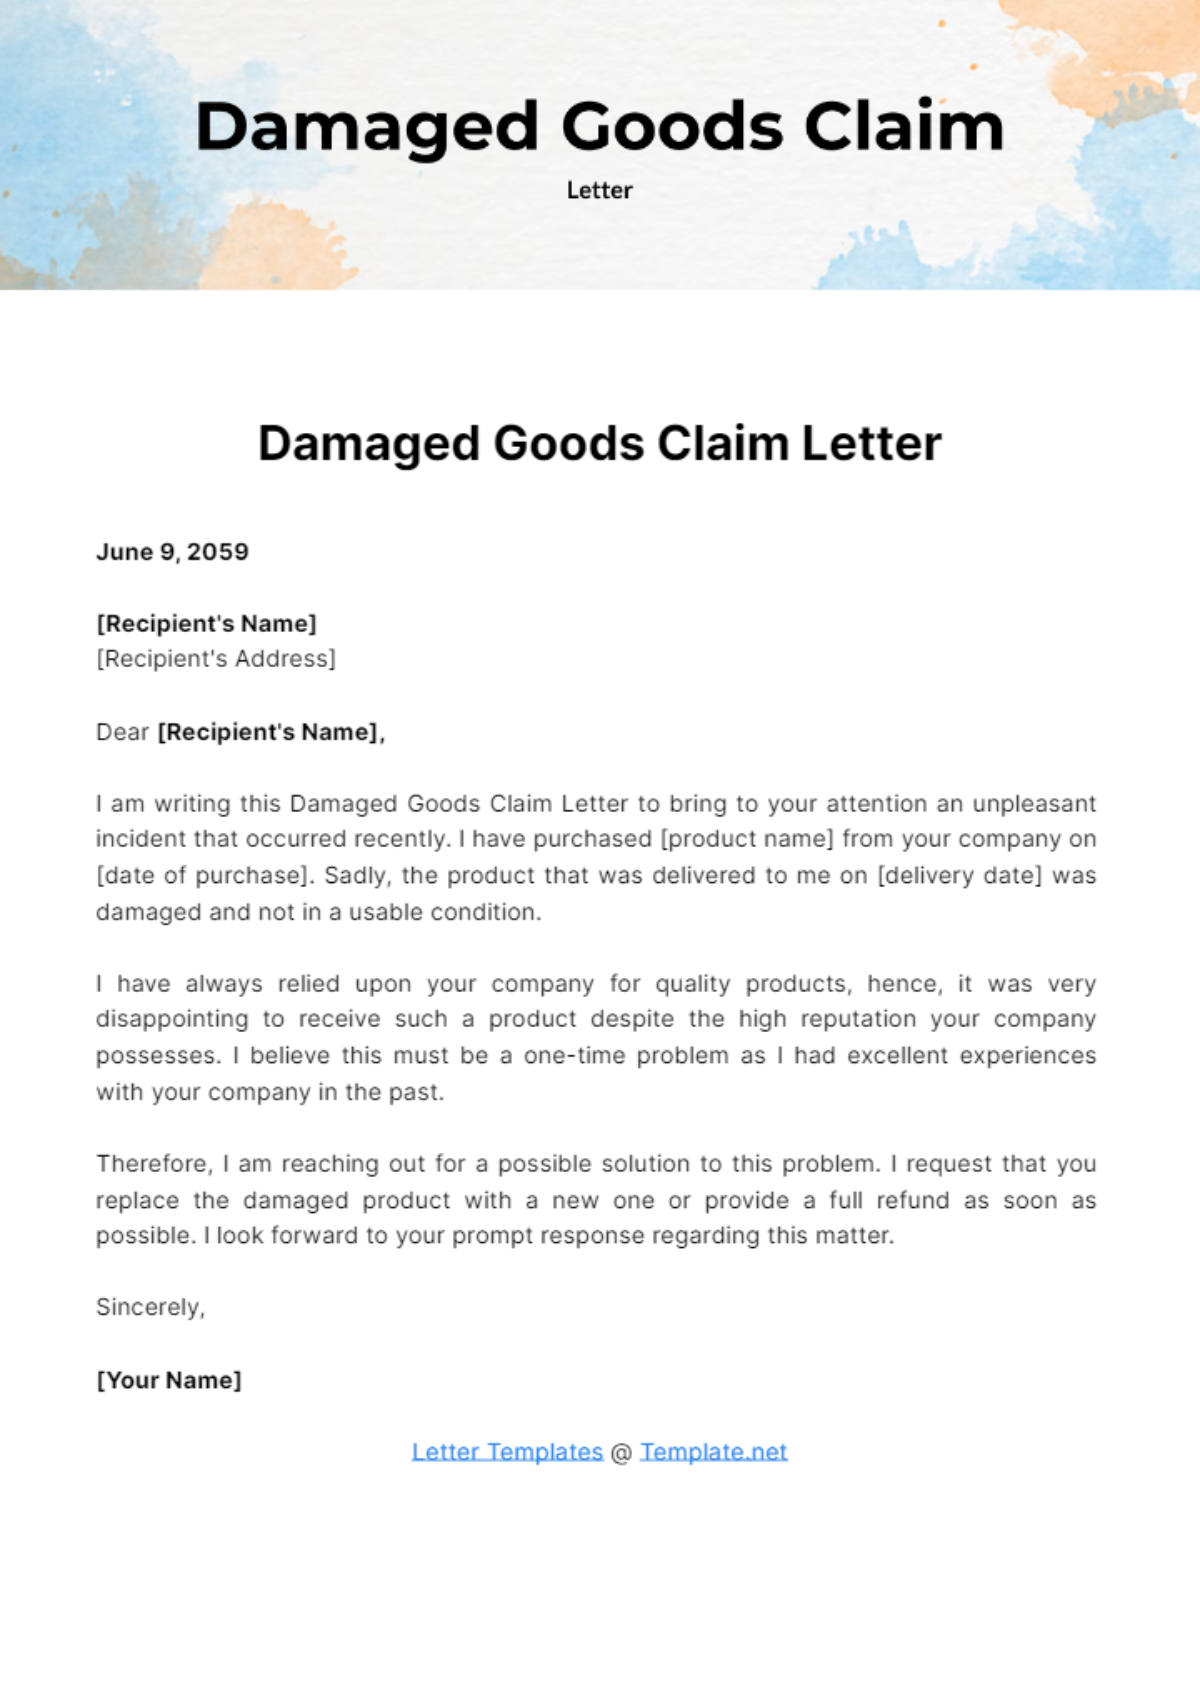 Free Damaged Goods Claim Letter Template